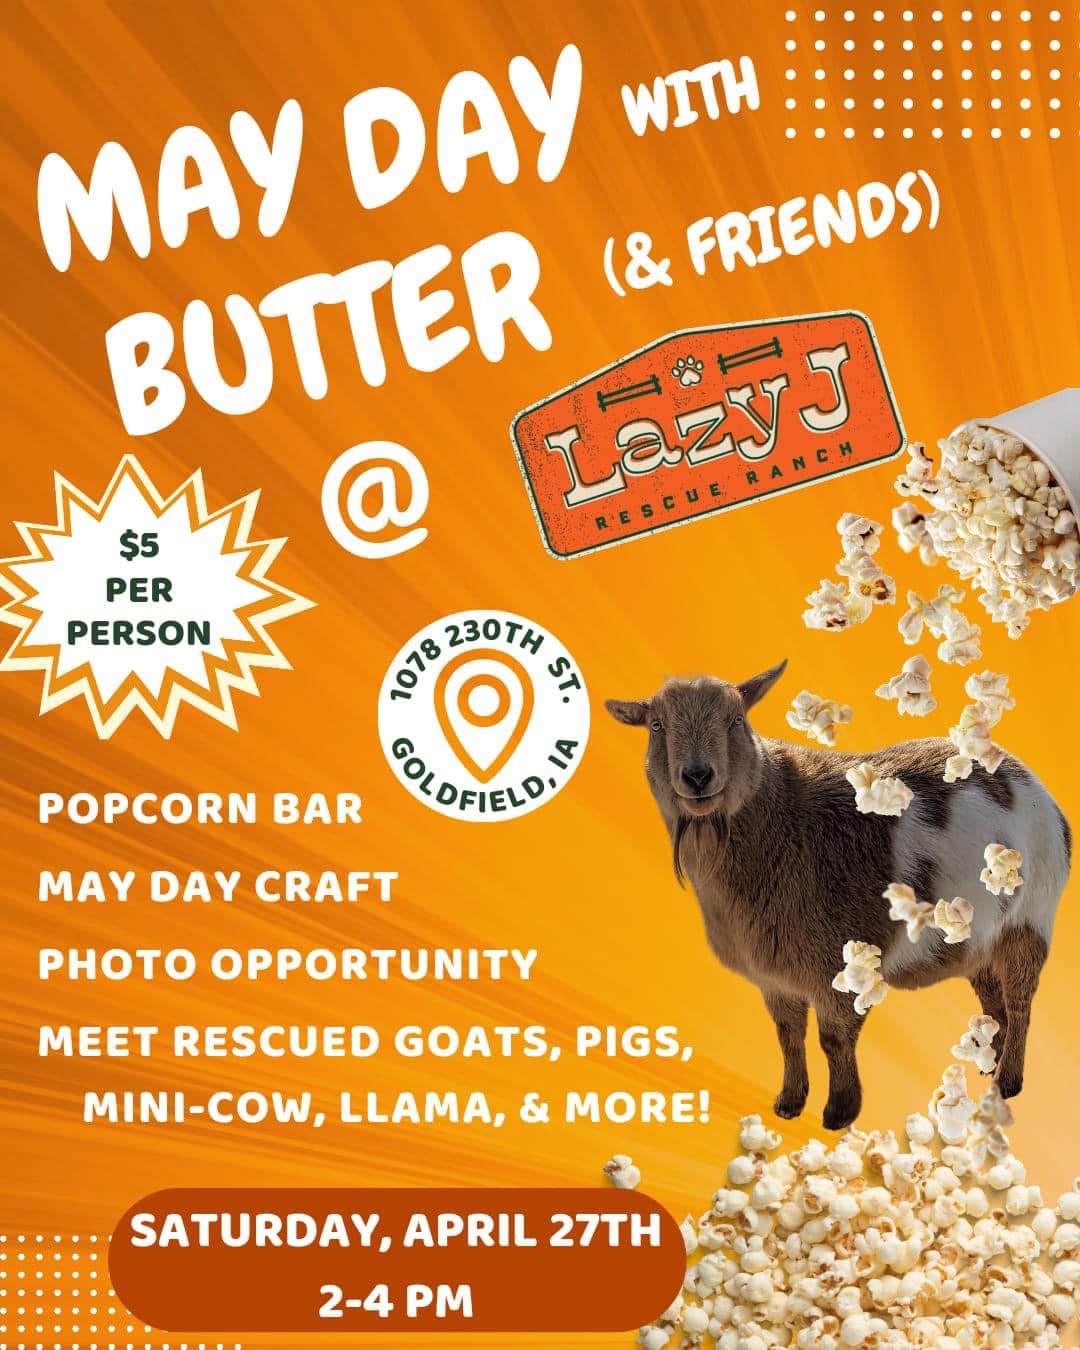 <h1 class="tribe-events-single-event-title">May Day with Butter & Friends</h1>